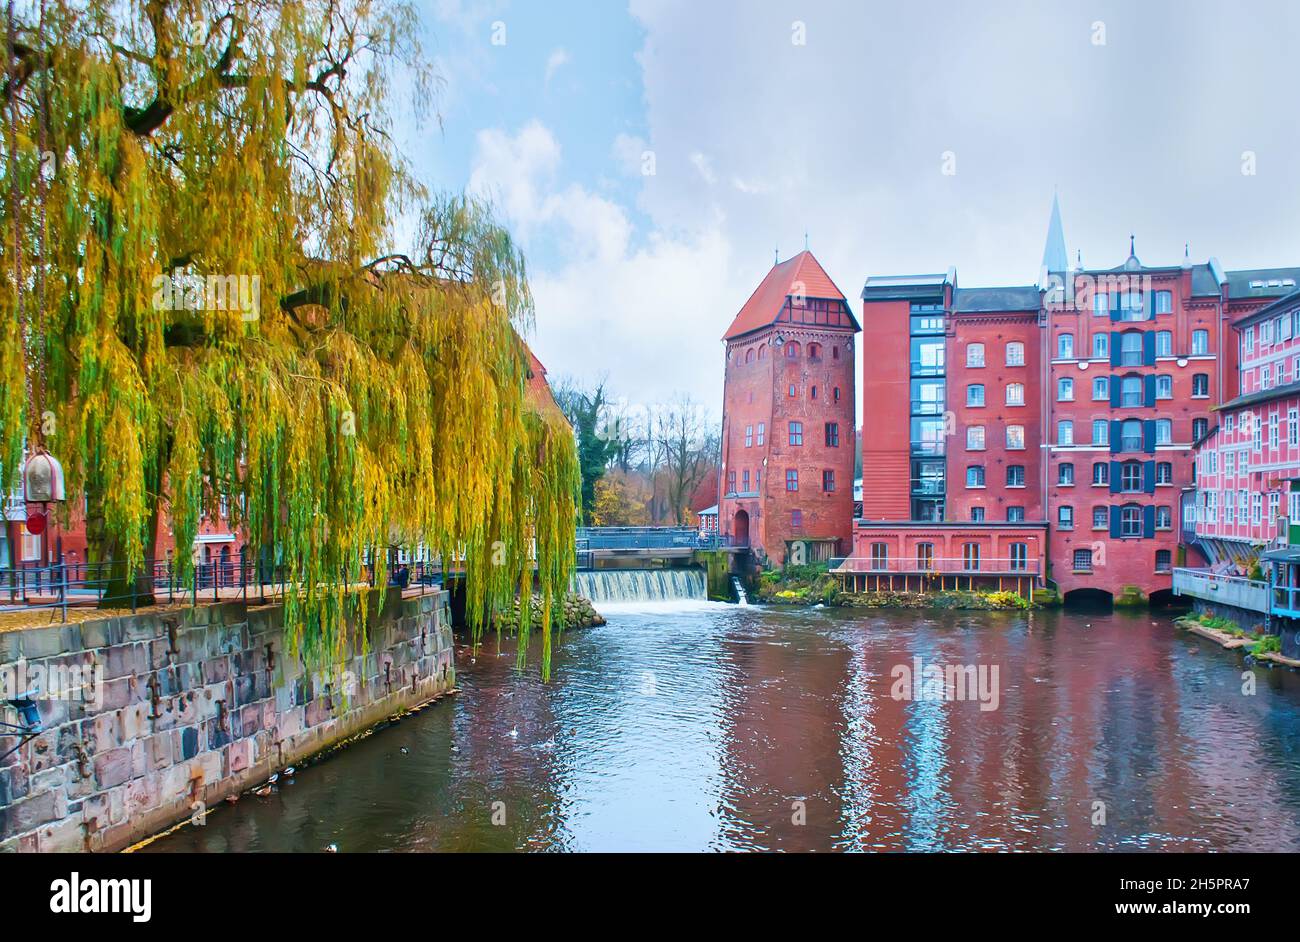 The view on Ilmenau River flowing in Luneburg old town and medieval tower on its bank, Germany Stock Photo